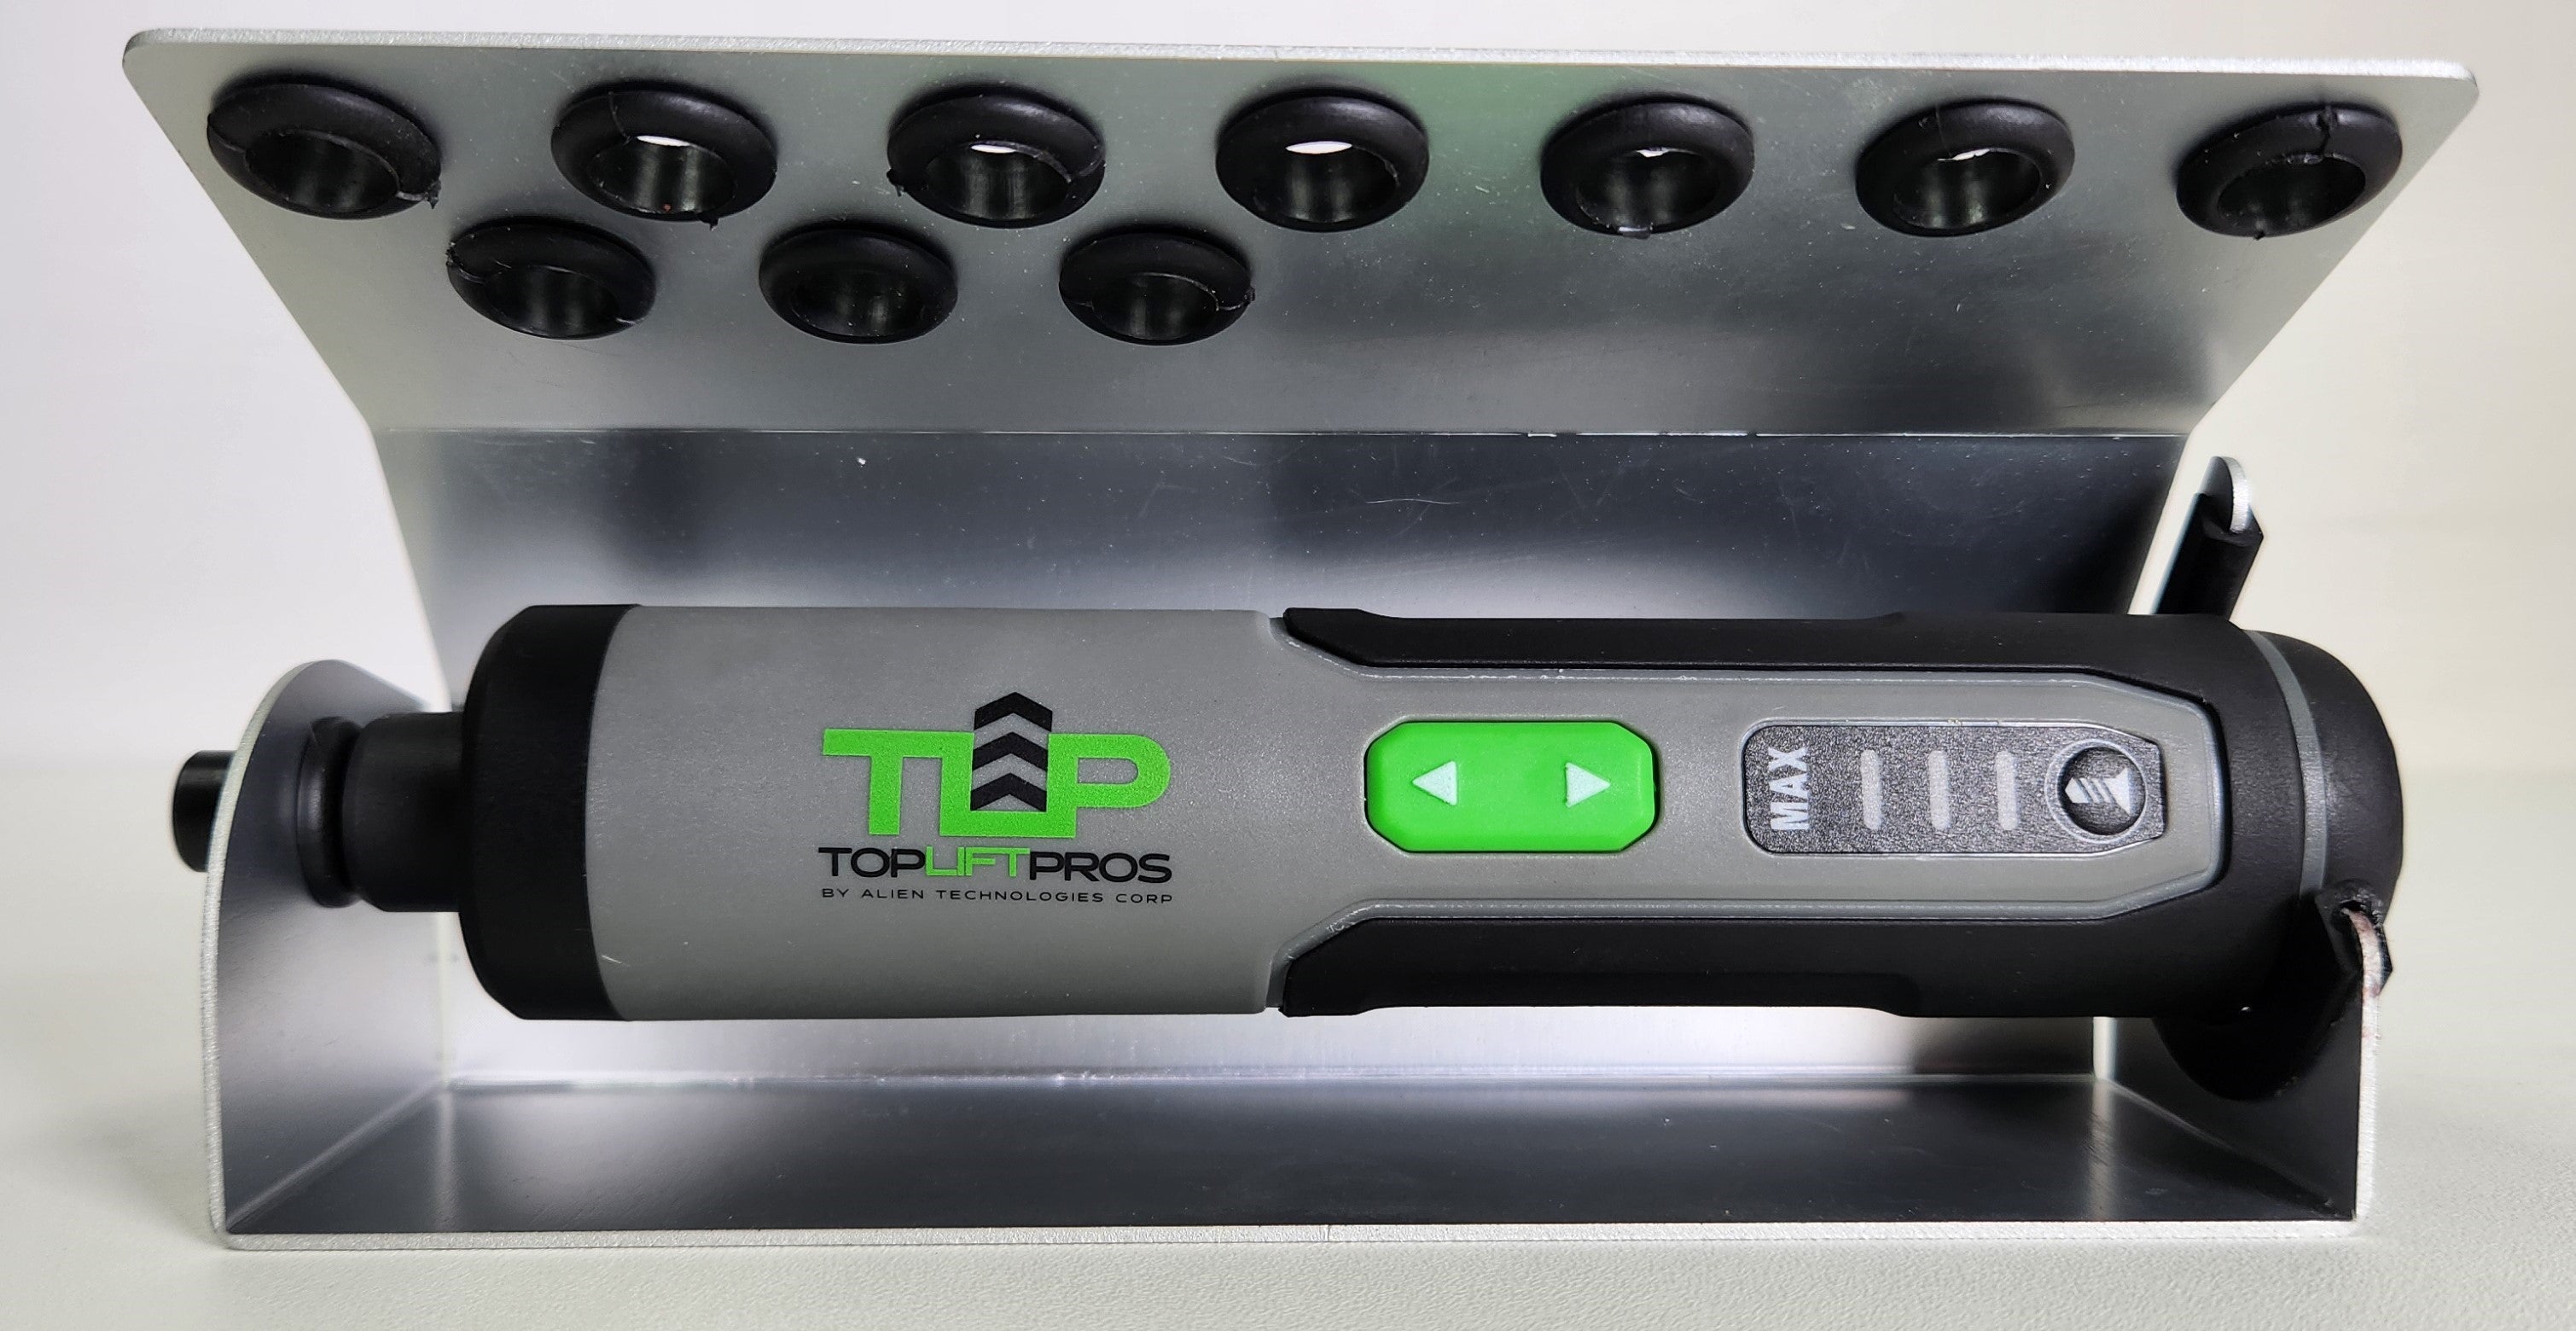 TopLift Pros™ TurnPro Cordless Driver Re-chargeable Tool with Bits and Station for Hart Top Bolts